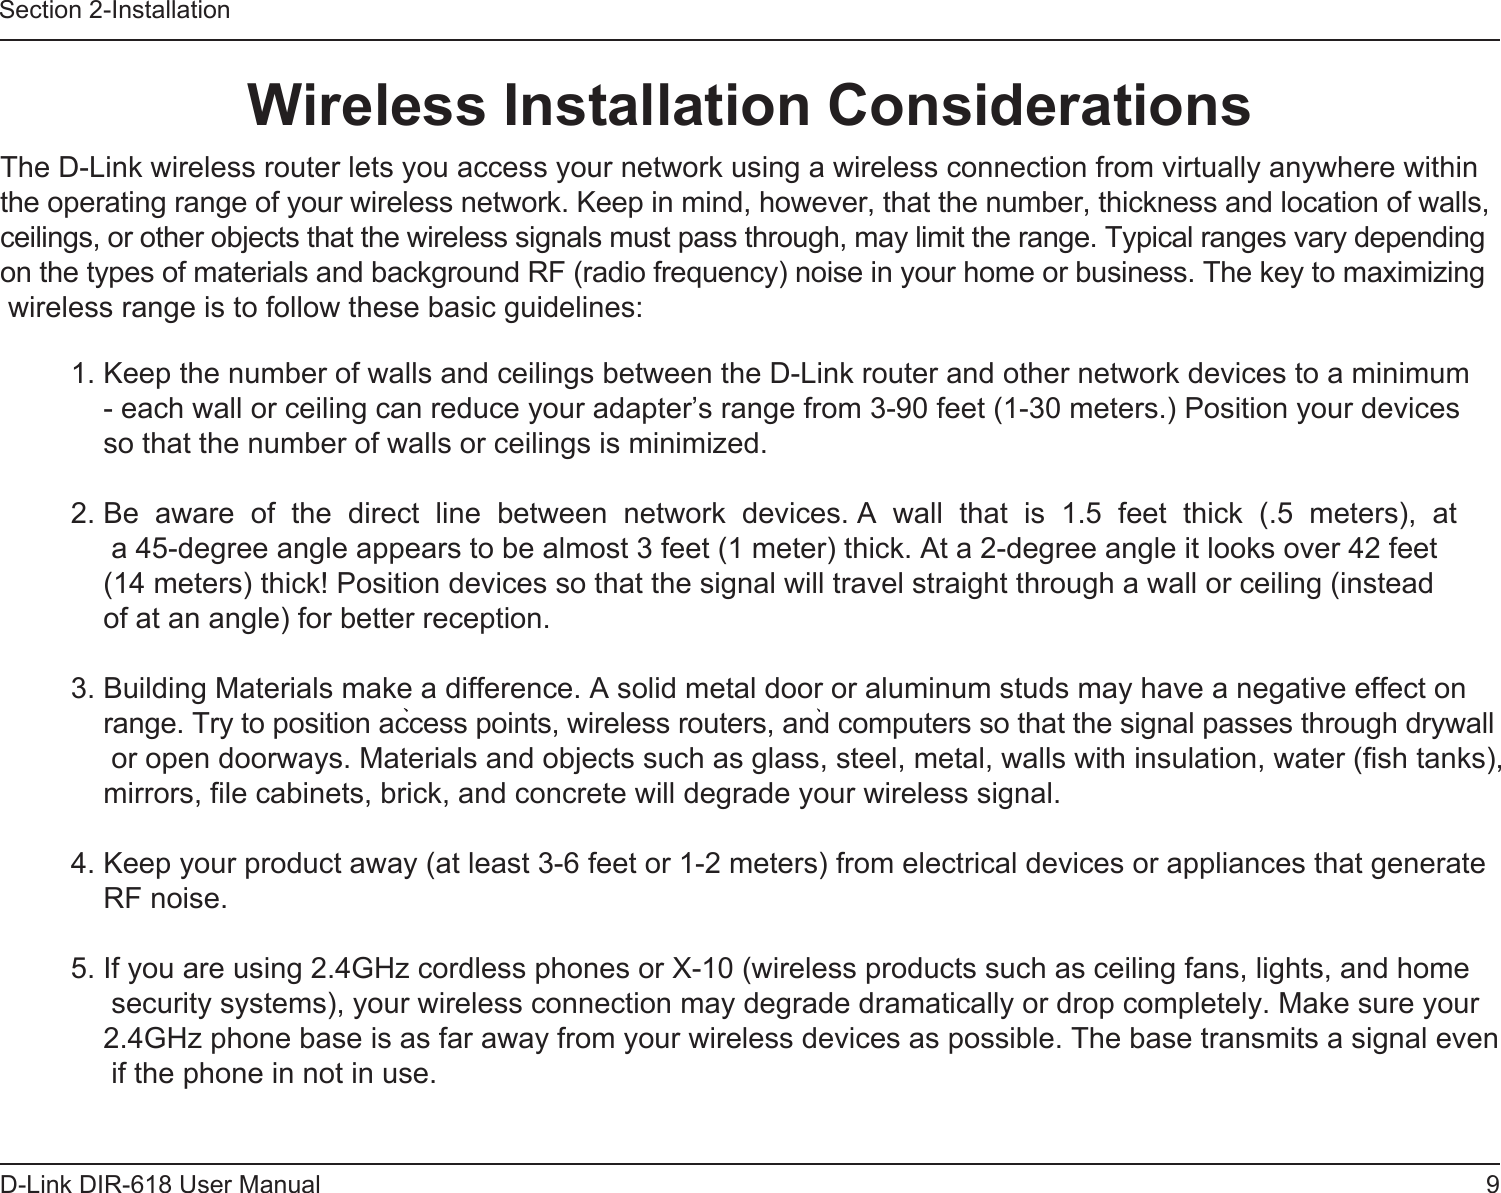 9D-Link DIR-618 User ManualSection 2-InstallationWireless Installation Considerations               The D-Link wireless router lets you access your network using a wireless connection from virtually anywhere withinthe operating range of your wireless network. Keep in mind, however, that the number, thickness and location of walls, ceilings, or other objects that the wireless signals must pass through, may limit the range. Typical ranges vary dependingon the types of materials and background RF (radio frequency) noise in your home or business. The key to maximizing wireless range is to follow these basic guidelines: 1. Keep the number of walls and ceilings between the D-Link router and other network devices to a minimum- each wall or ceiling can reduce your adapter’s range from 3-90 feet (1-30 meters.) Position your devicesso that the number of walls or ceilings is minimized.2. Be  aware  of  the  direct  line  between  network  devices. A  wall  that  is  1.5  feet  thick  (.5  meters),  at  a 45-degree angle appears to be almost 3 feet (1 meter) thick. At a 2-degree angle it looks over 42 feet(14 meters) thick! Position devices so that the signal will travel straight through a wall or ceiling (insteadof at an angle) for better reception.3. Building Materials make a difference. A solid metal door or aluminum studs may have a negative effect on range. Try to position access points, wireless routers, and computers so that the signal passes through drywall or open doorways. Materials and objects such as glass, steel, metal, walls with insulation, water (fish tanks), mirrors, file cabinets, brick, and concrete will degrade your wireless signal.4. Keep your product away (at least 3-6 feet or 1-2 meters) from electrical devices or appliances that generate RF noise.5. If you are using 2.4GHz cordless phones or X-10 (wireless products such as ceiling fans, lights, and home security systems), your wireless connection may degrade dramatically or drop completely. Make sure your 2.4GHz phone base is as far away from your wireless devices as possible. The base transmits a signal even if the phone in not in use.      